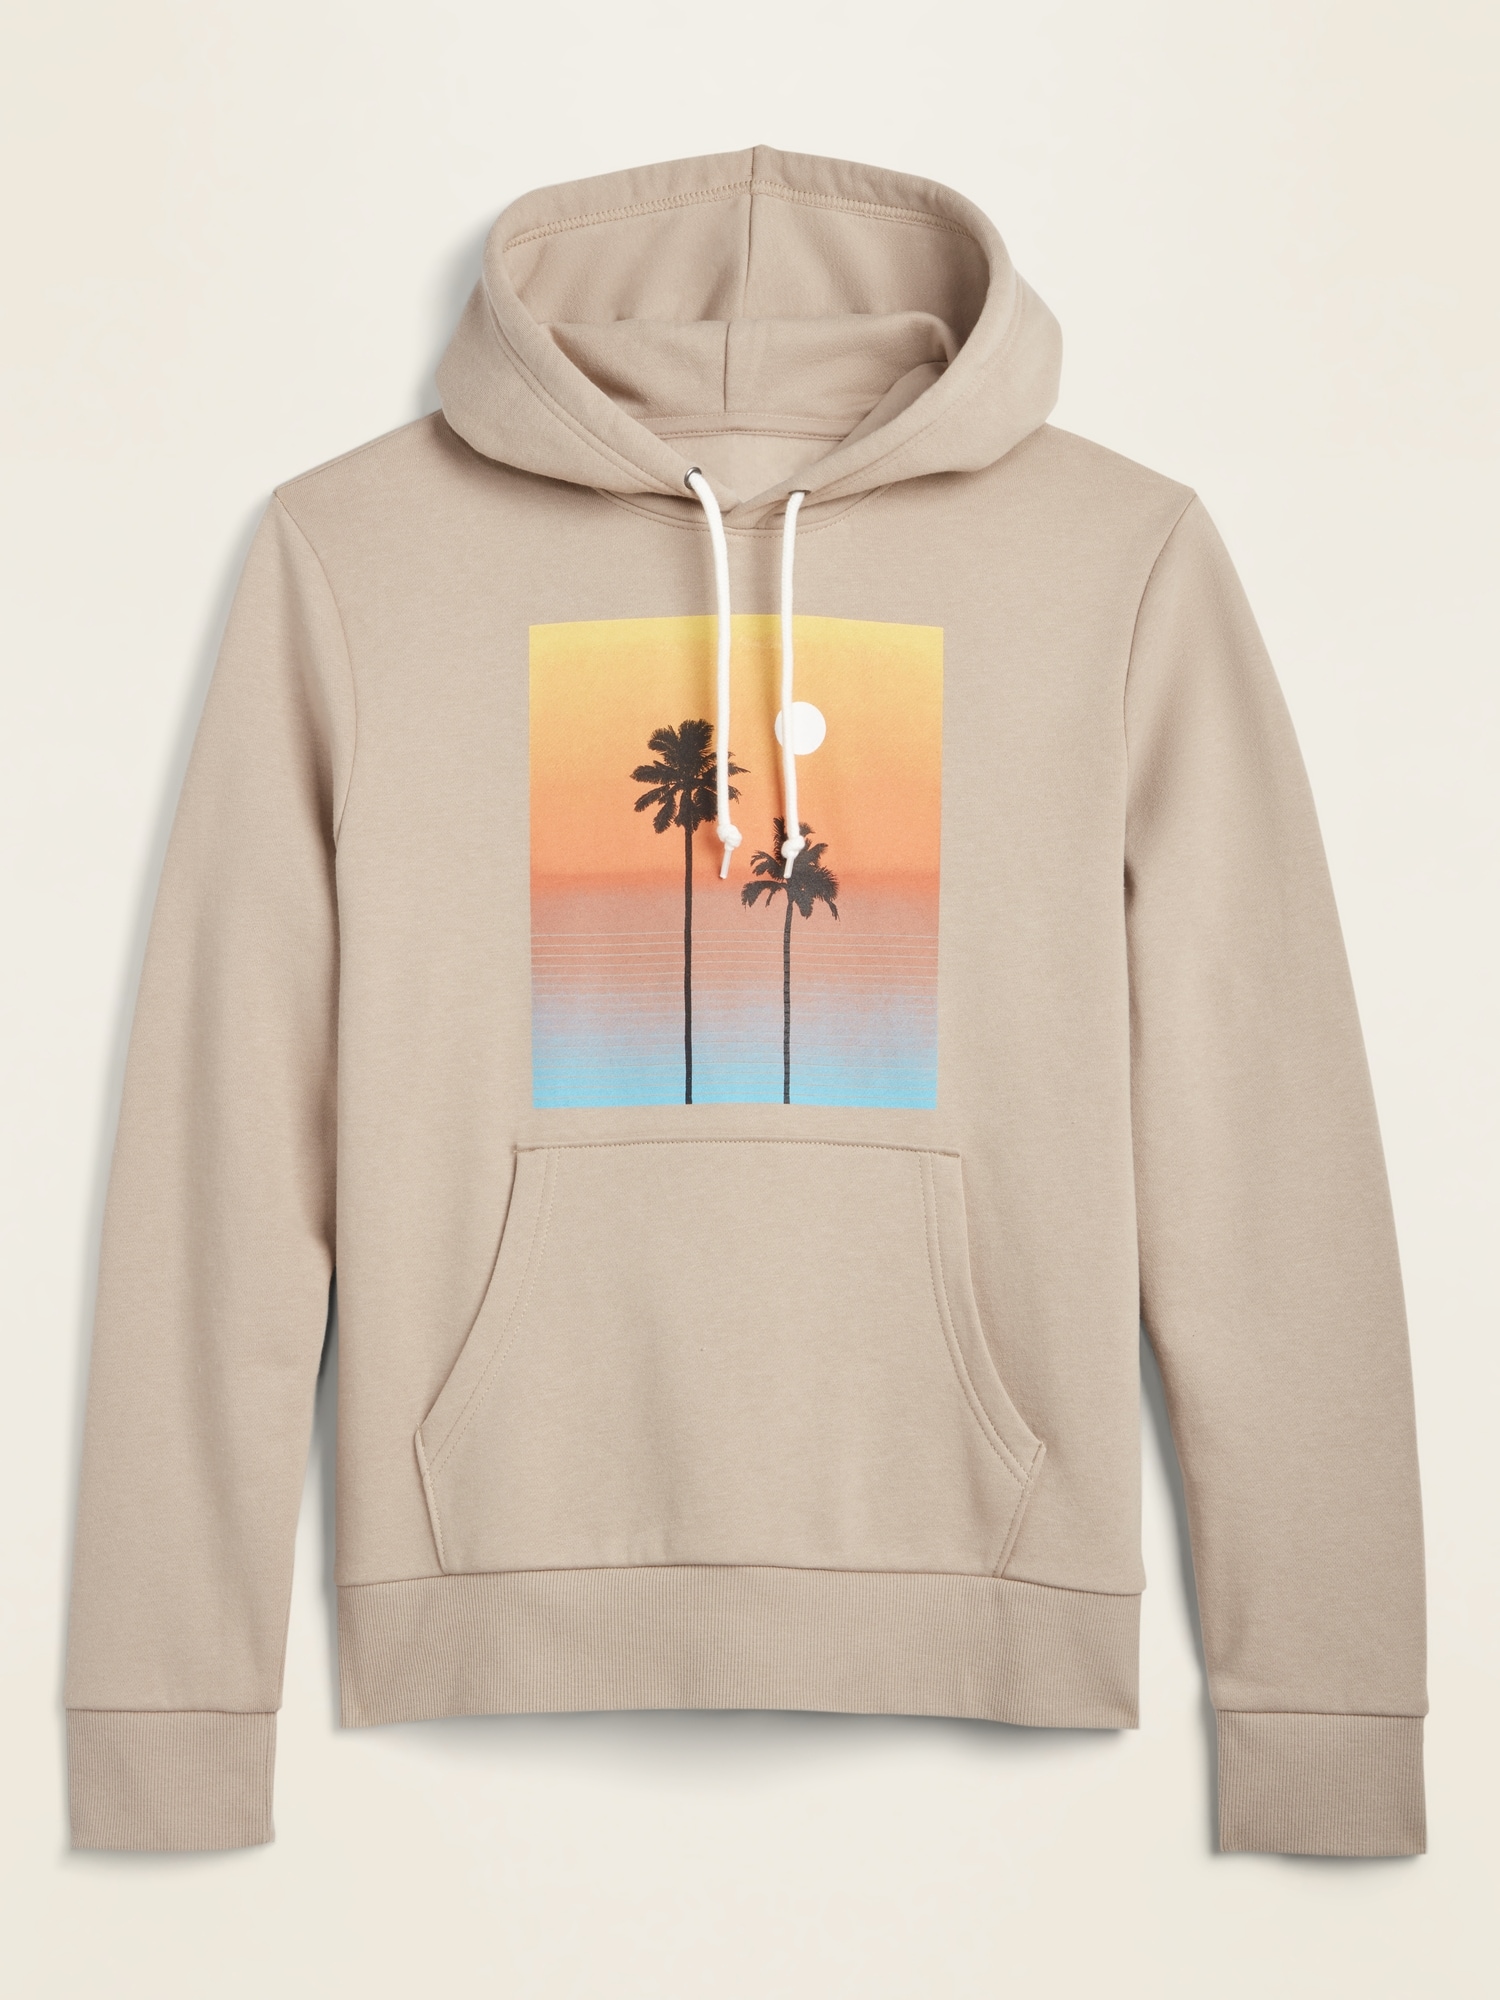 Clearwater Beach Relax Your Life Palm Tree Soft Style Pullover Hoodie 2XL / Navy